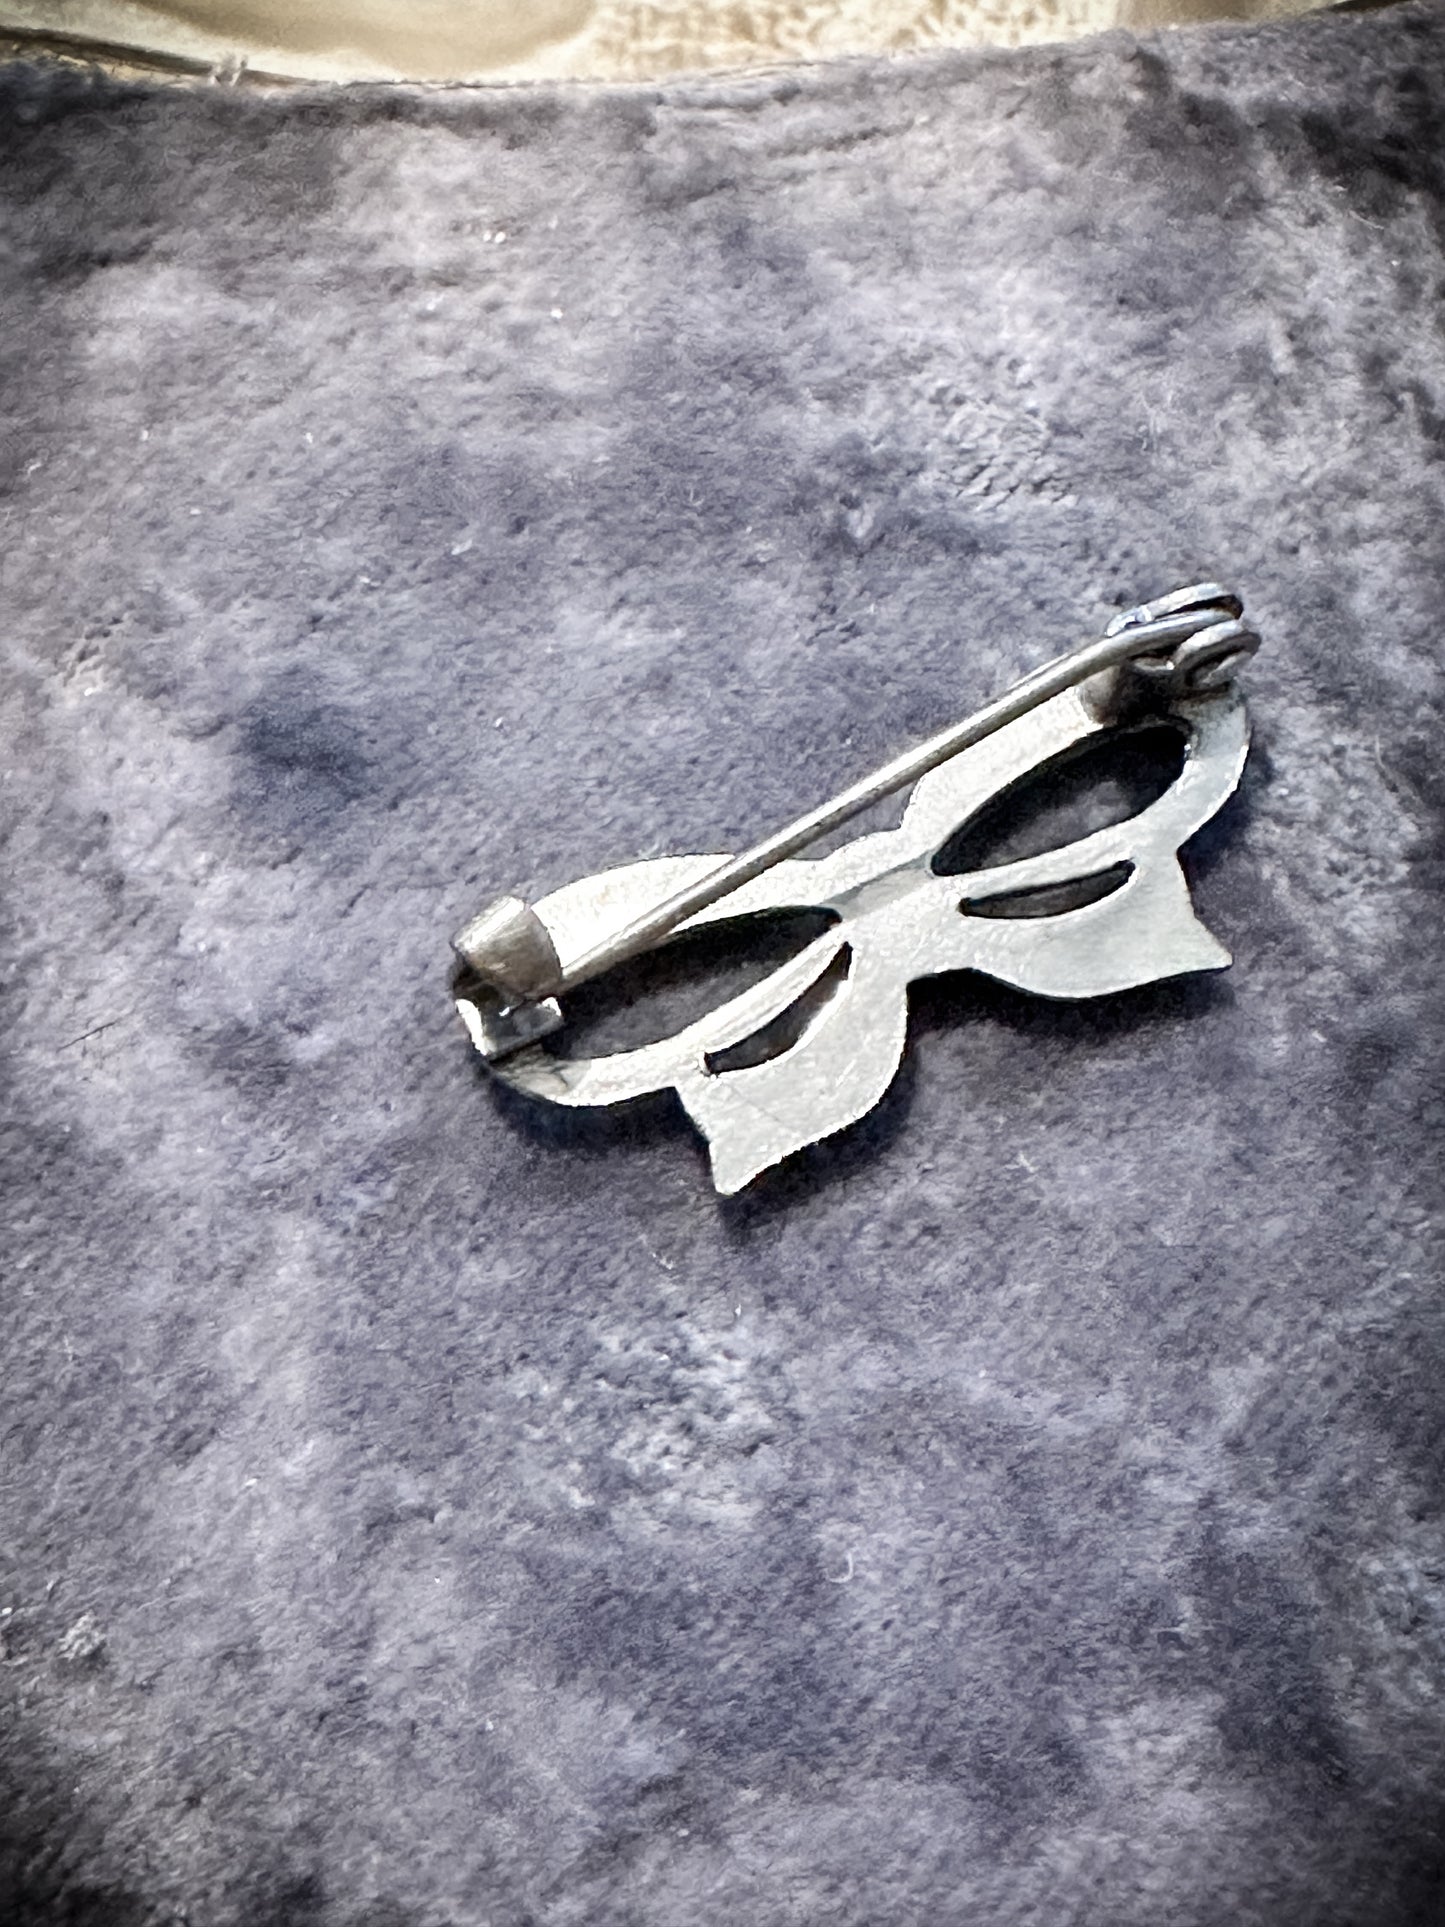 A miniature marcasite bow brooch